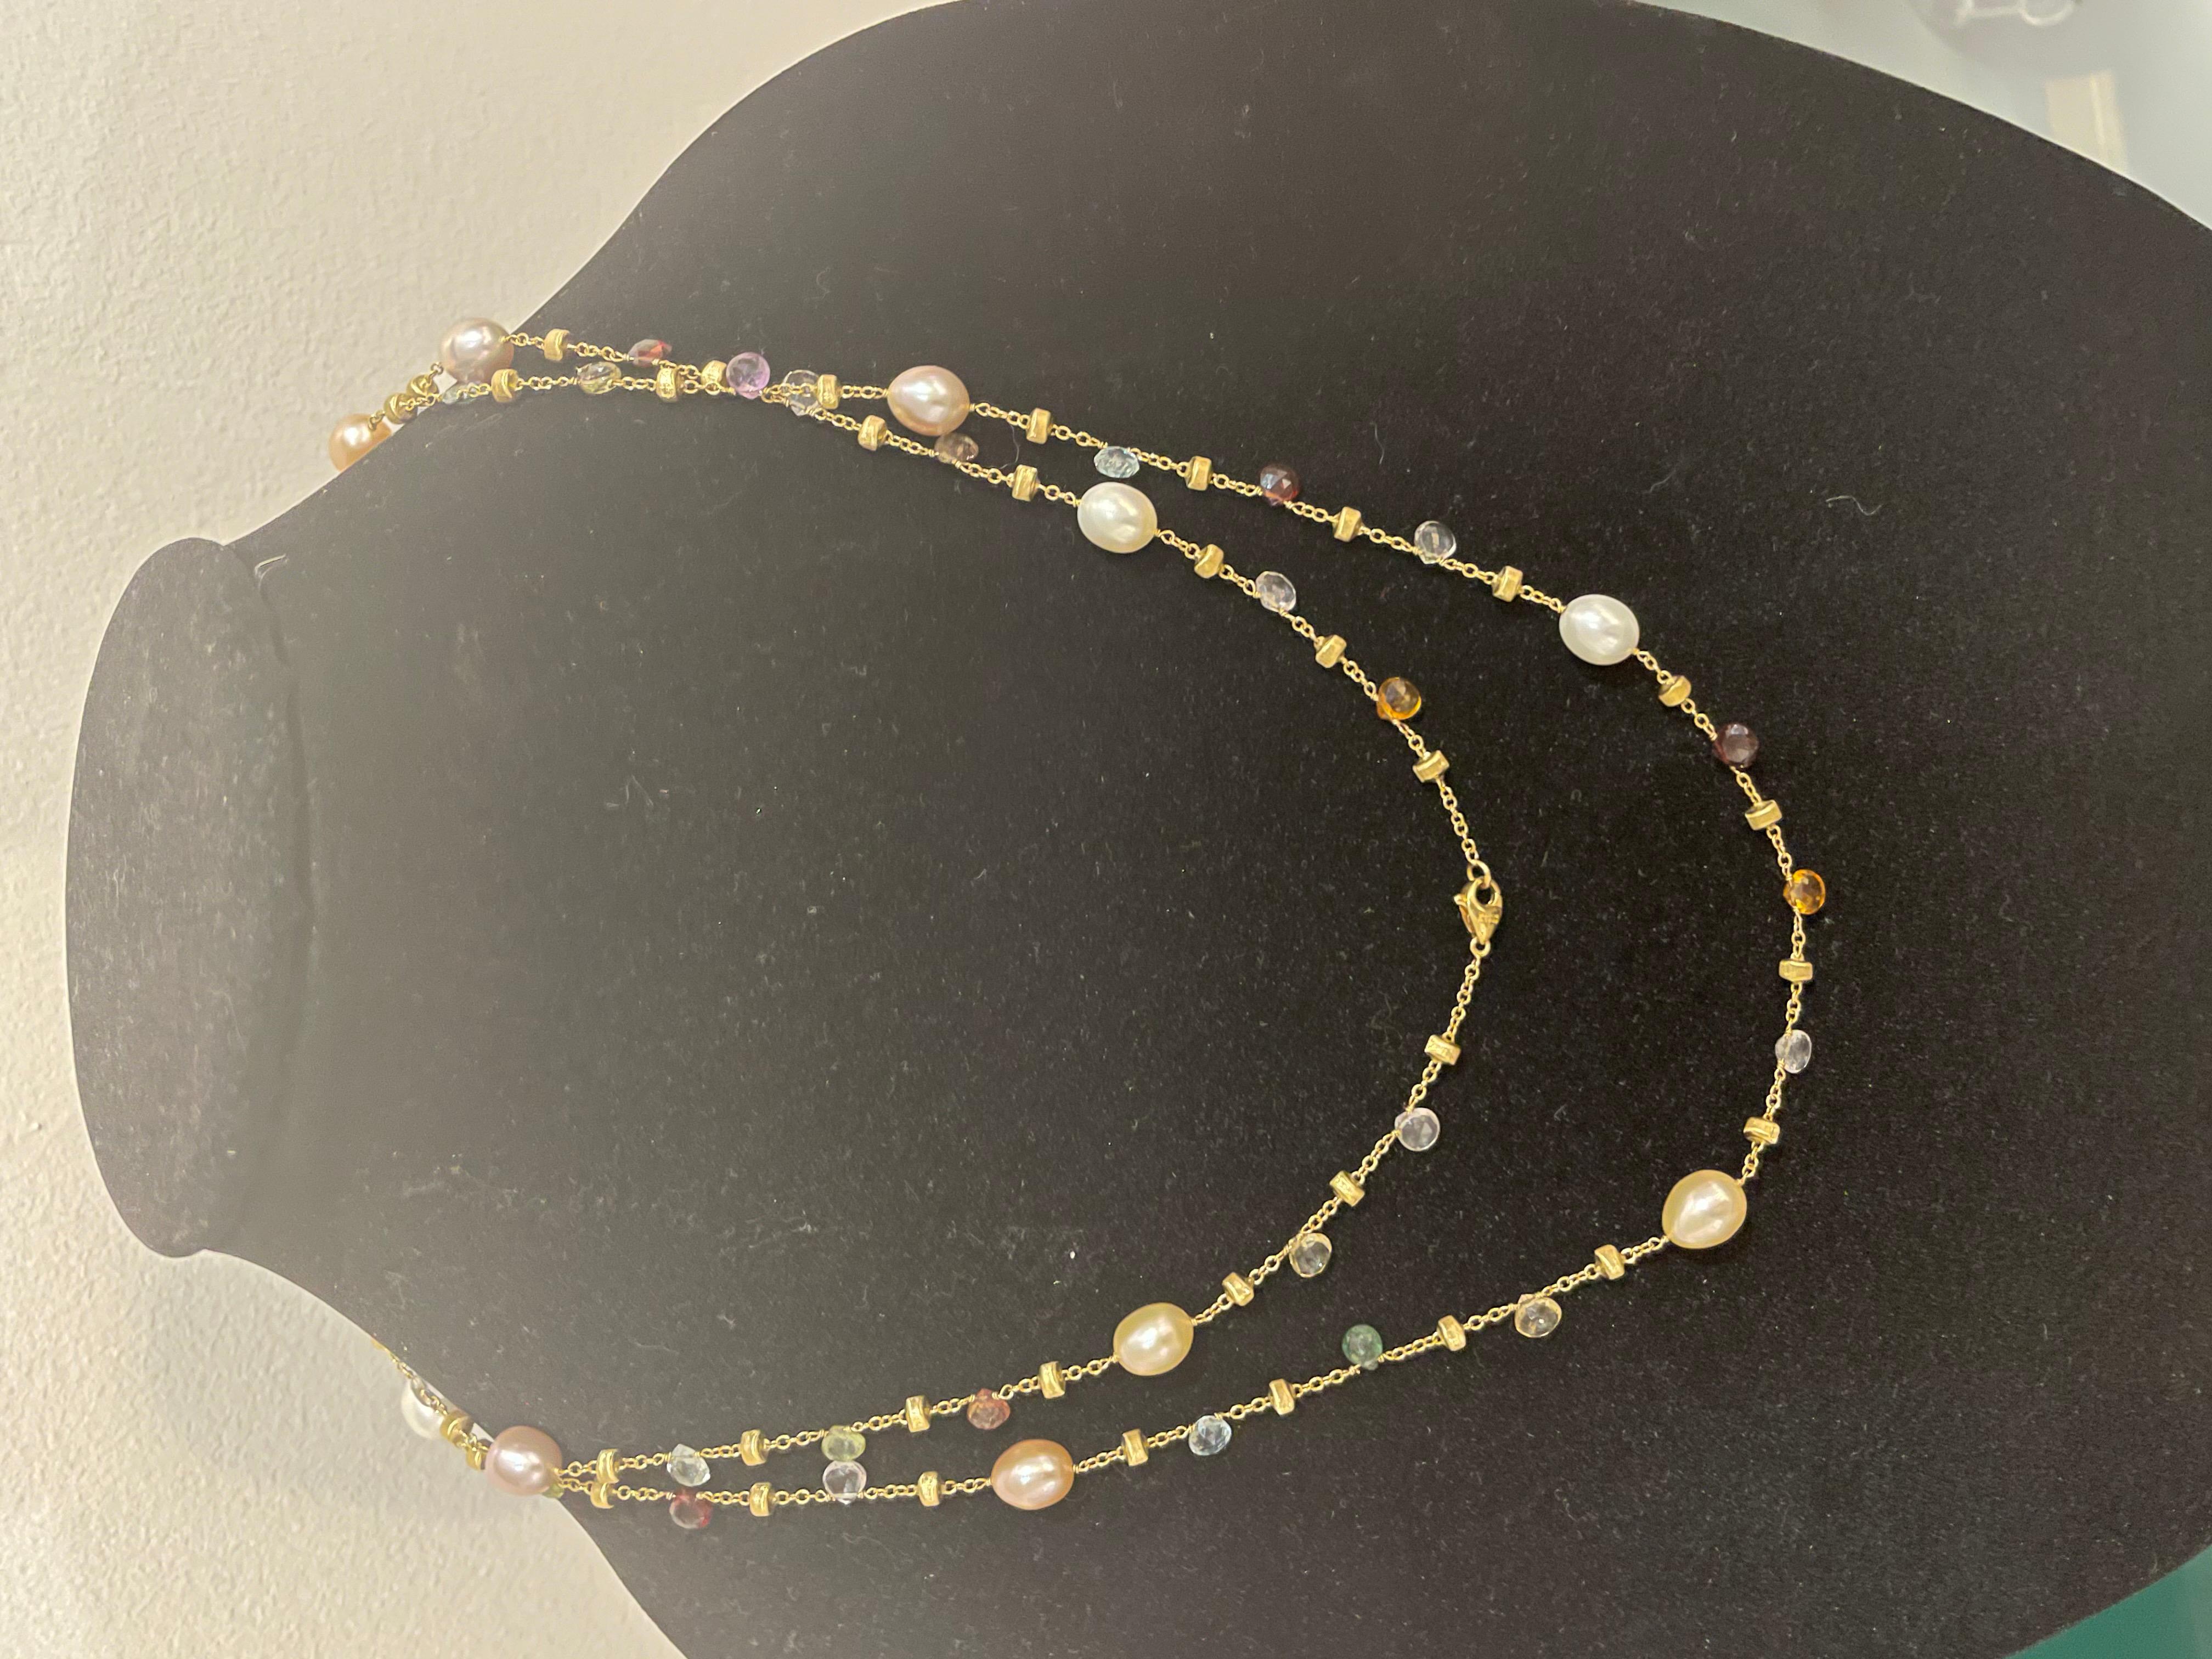 Stunning 18kt yellow gold Marco Bicego paradise necklace featuring pearls, amethyst, garnet, citrine, topaz, tourmalines and lolittes all in beautiful briolette cuts.